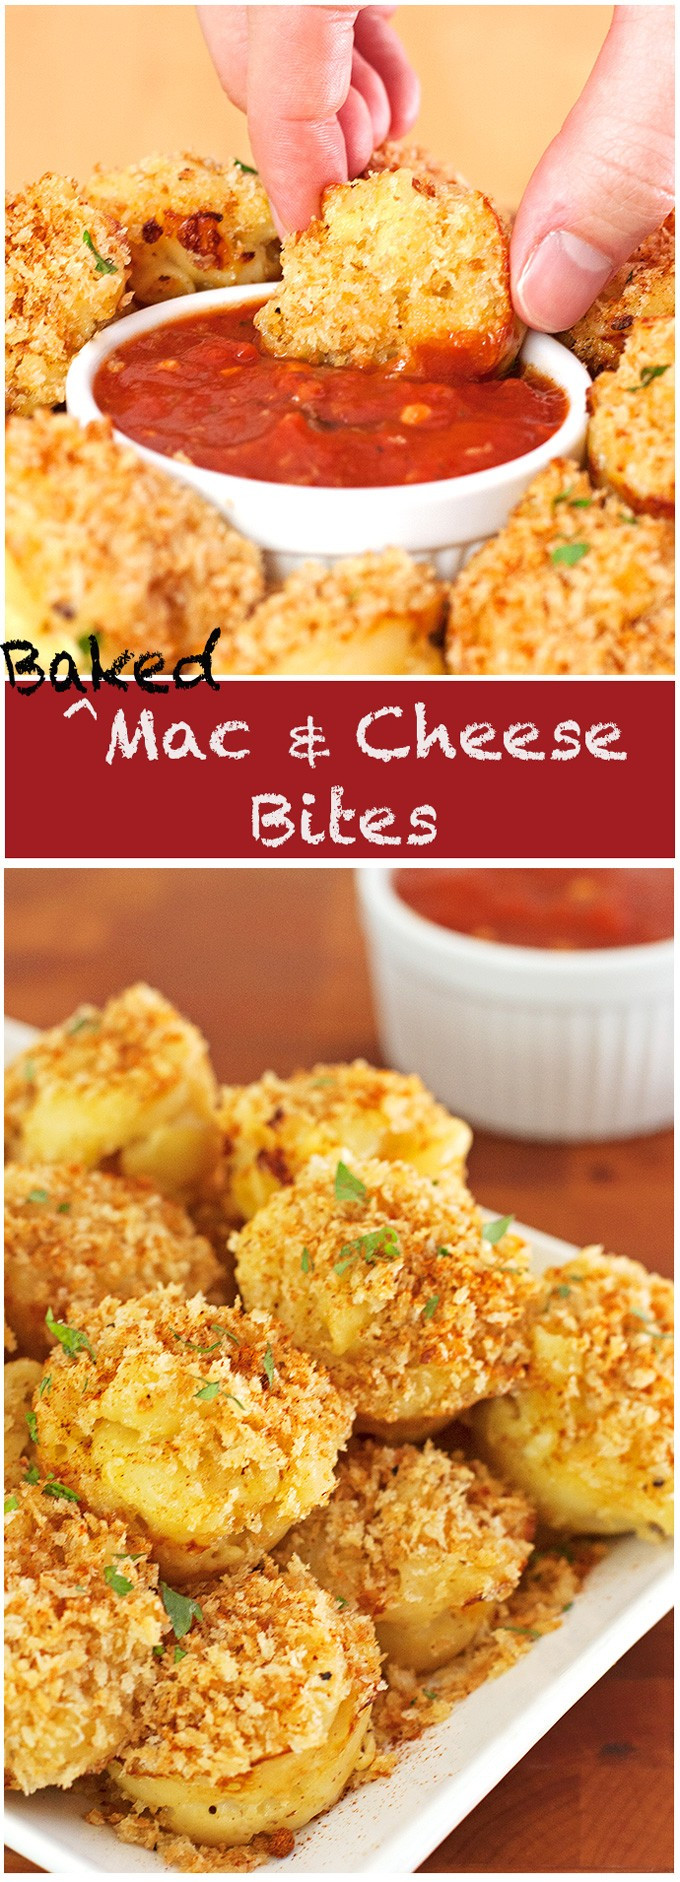 Macaroni And Cheese Bites Recipe Baked
 Baked Mac and Cheese Bites 2teaspoons